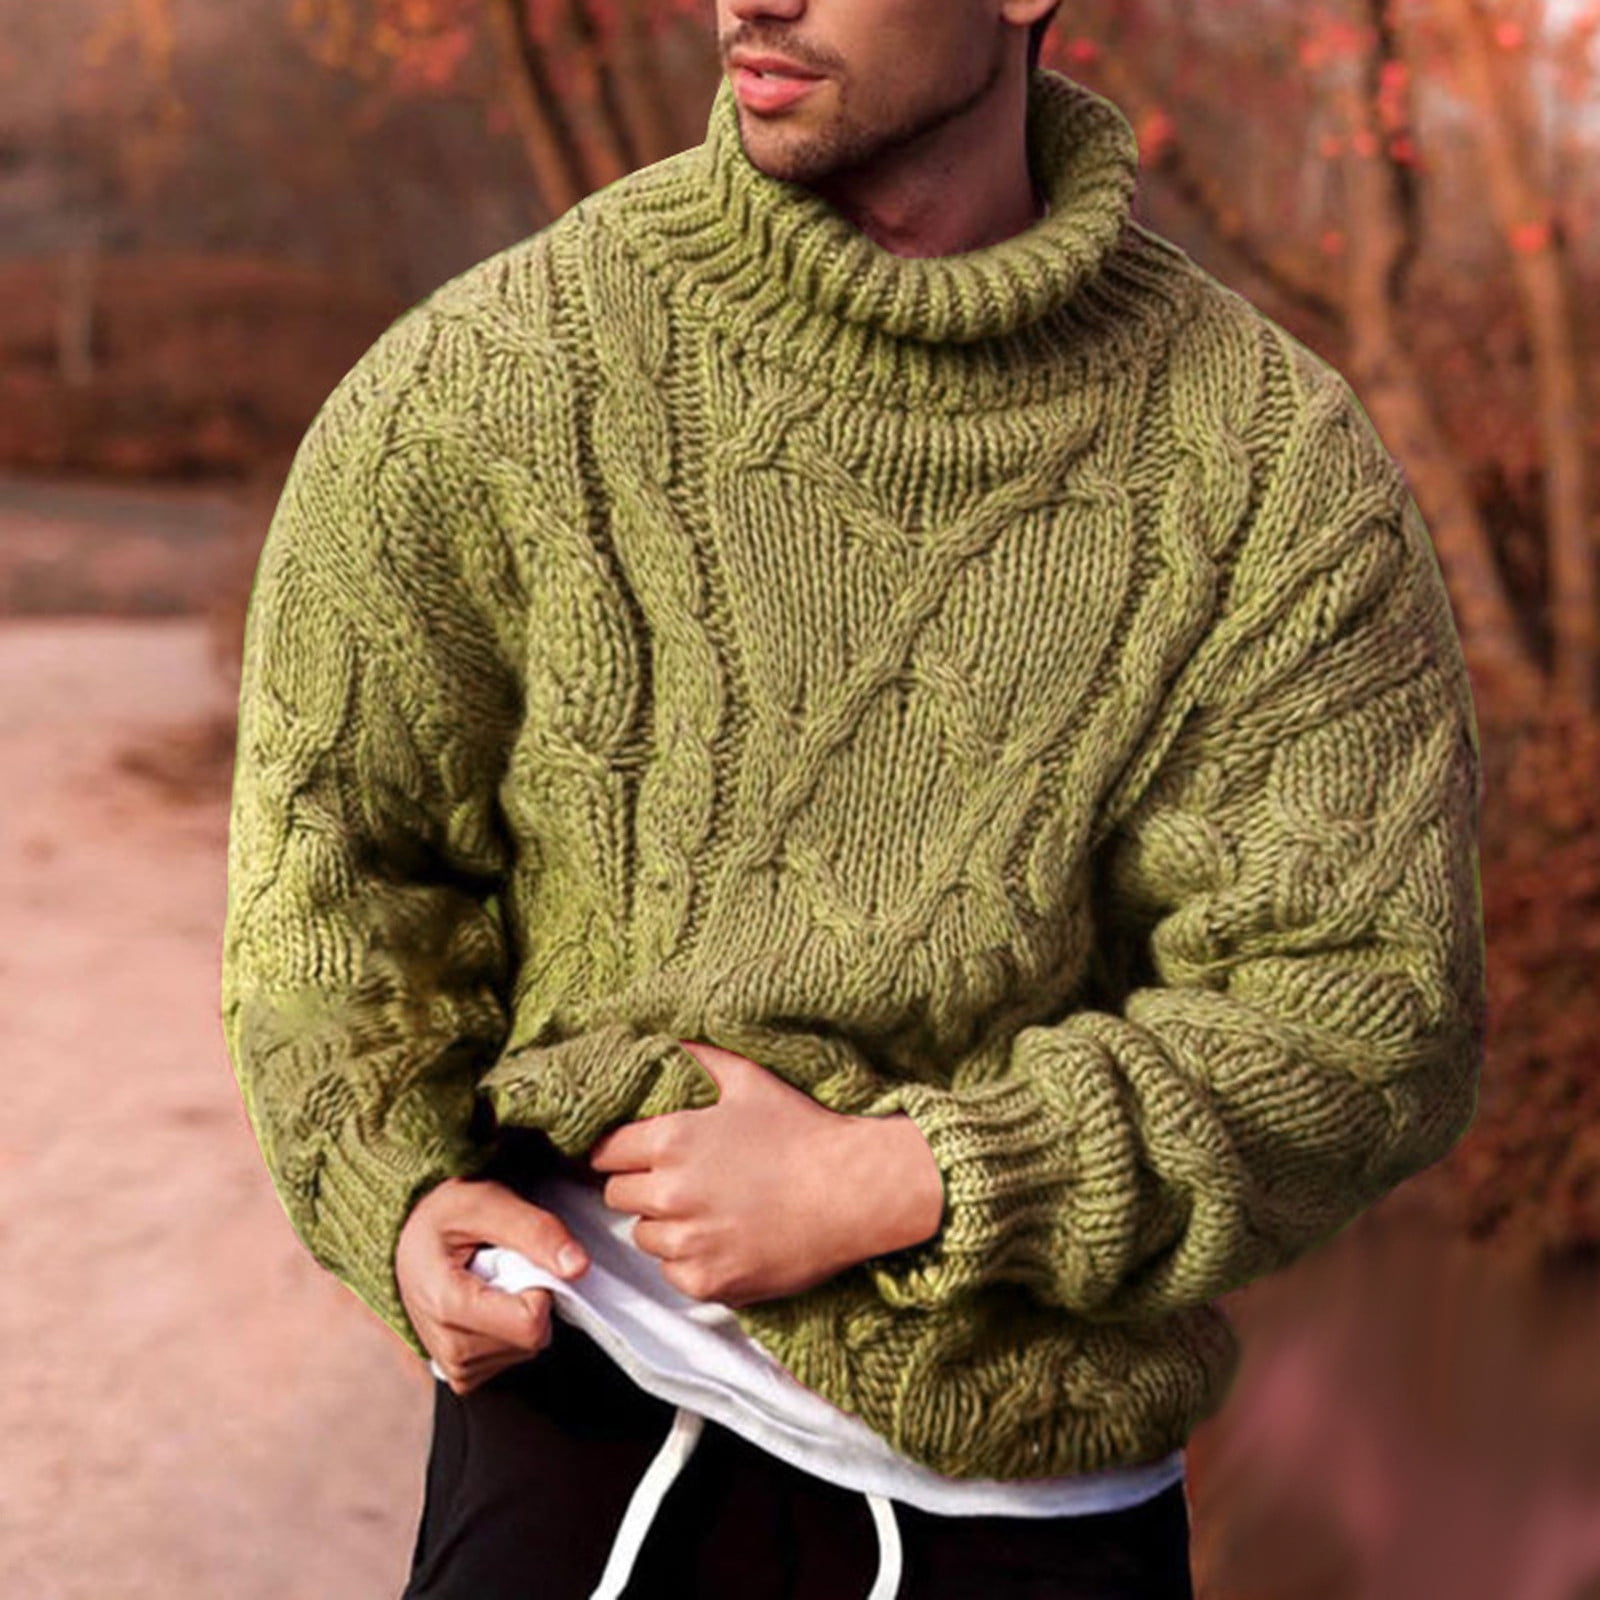 Wool Cable Knit Sweater, Man Sweater, Winter Man Clothing, Giant